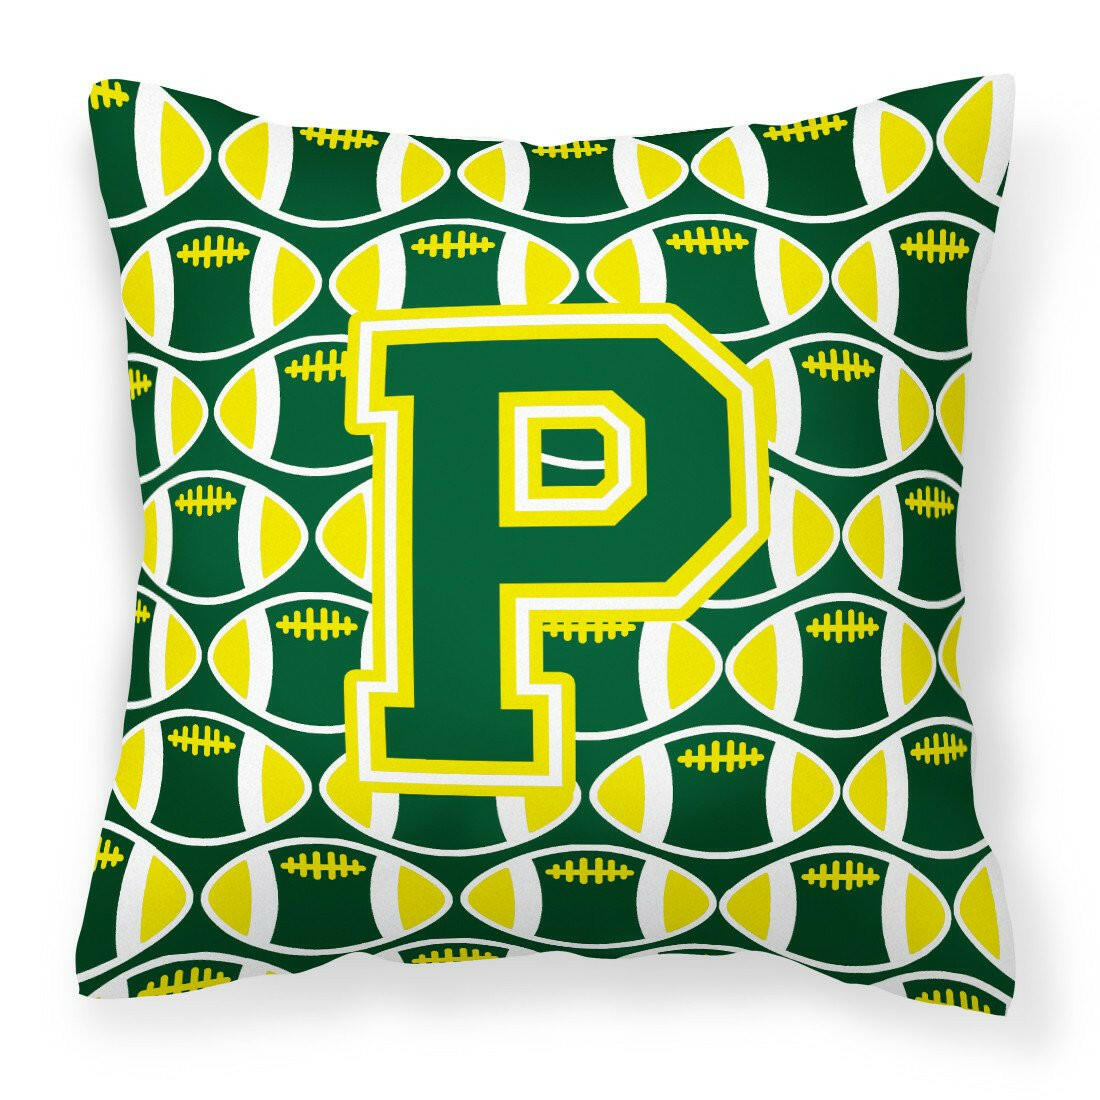 Letter P Football Green and Yellow Fabric Decorative Pillow CJ1075-PPW1414 by Caroline's Treasures